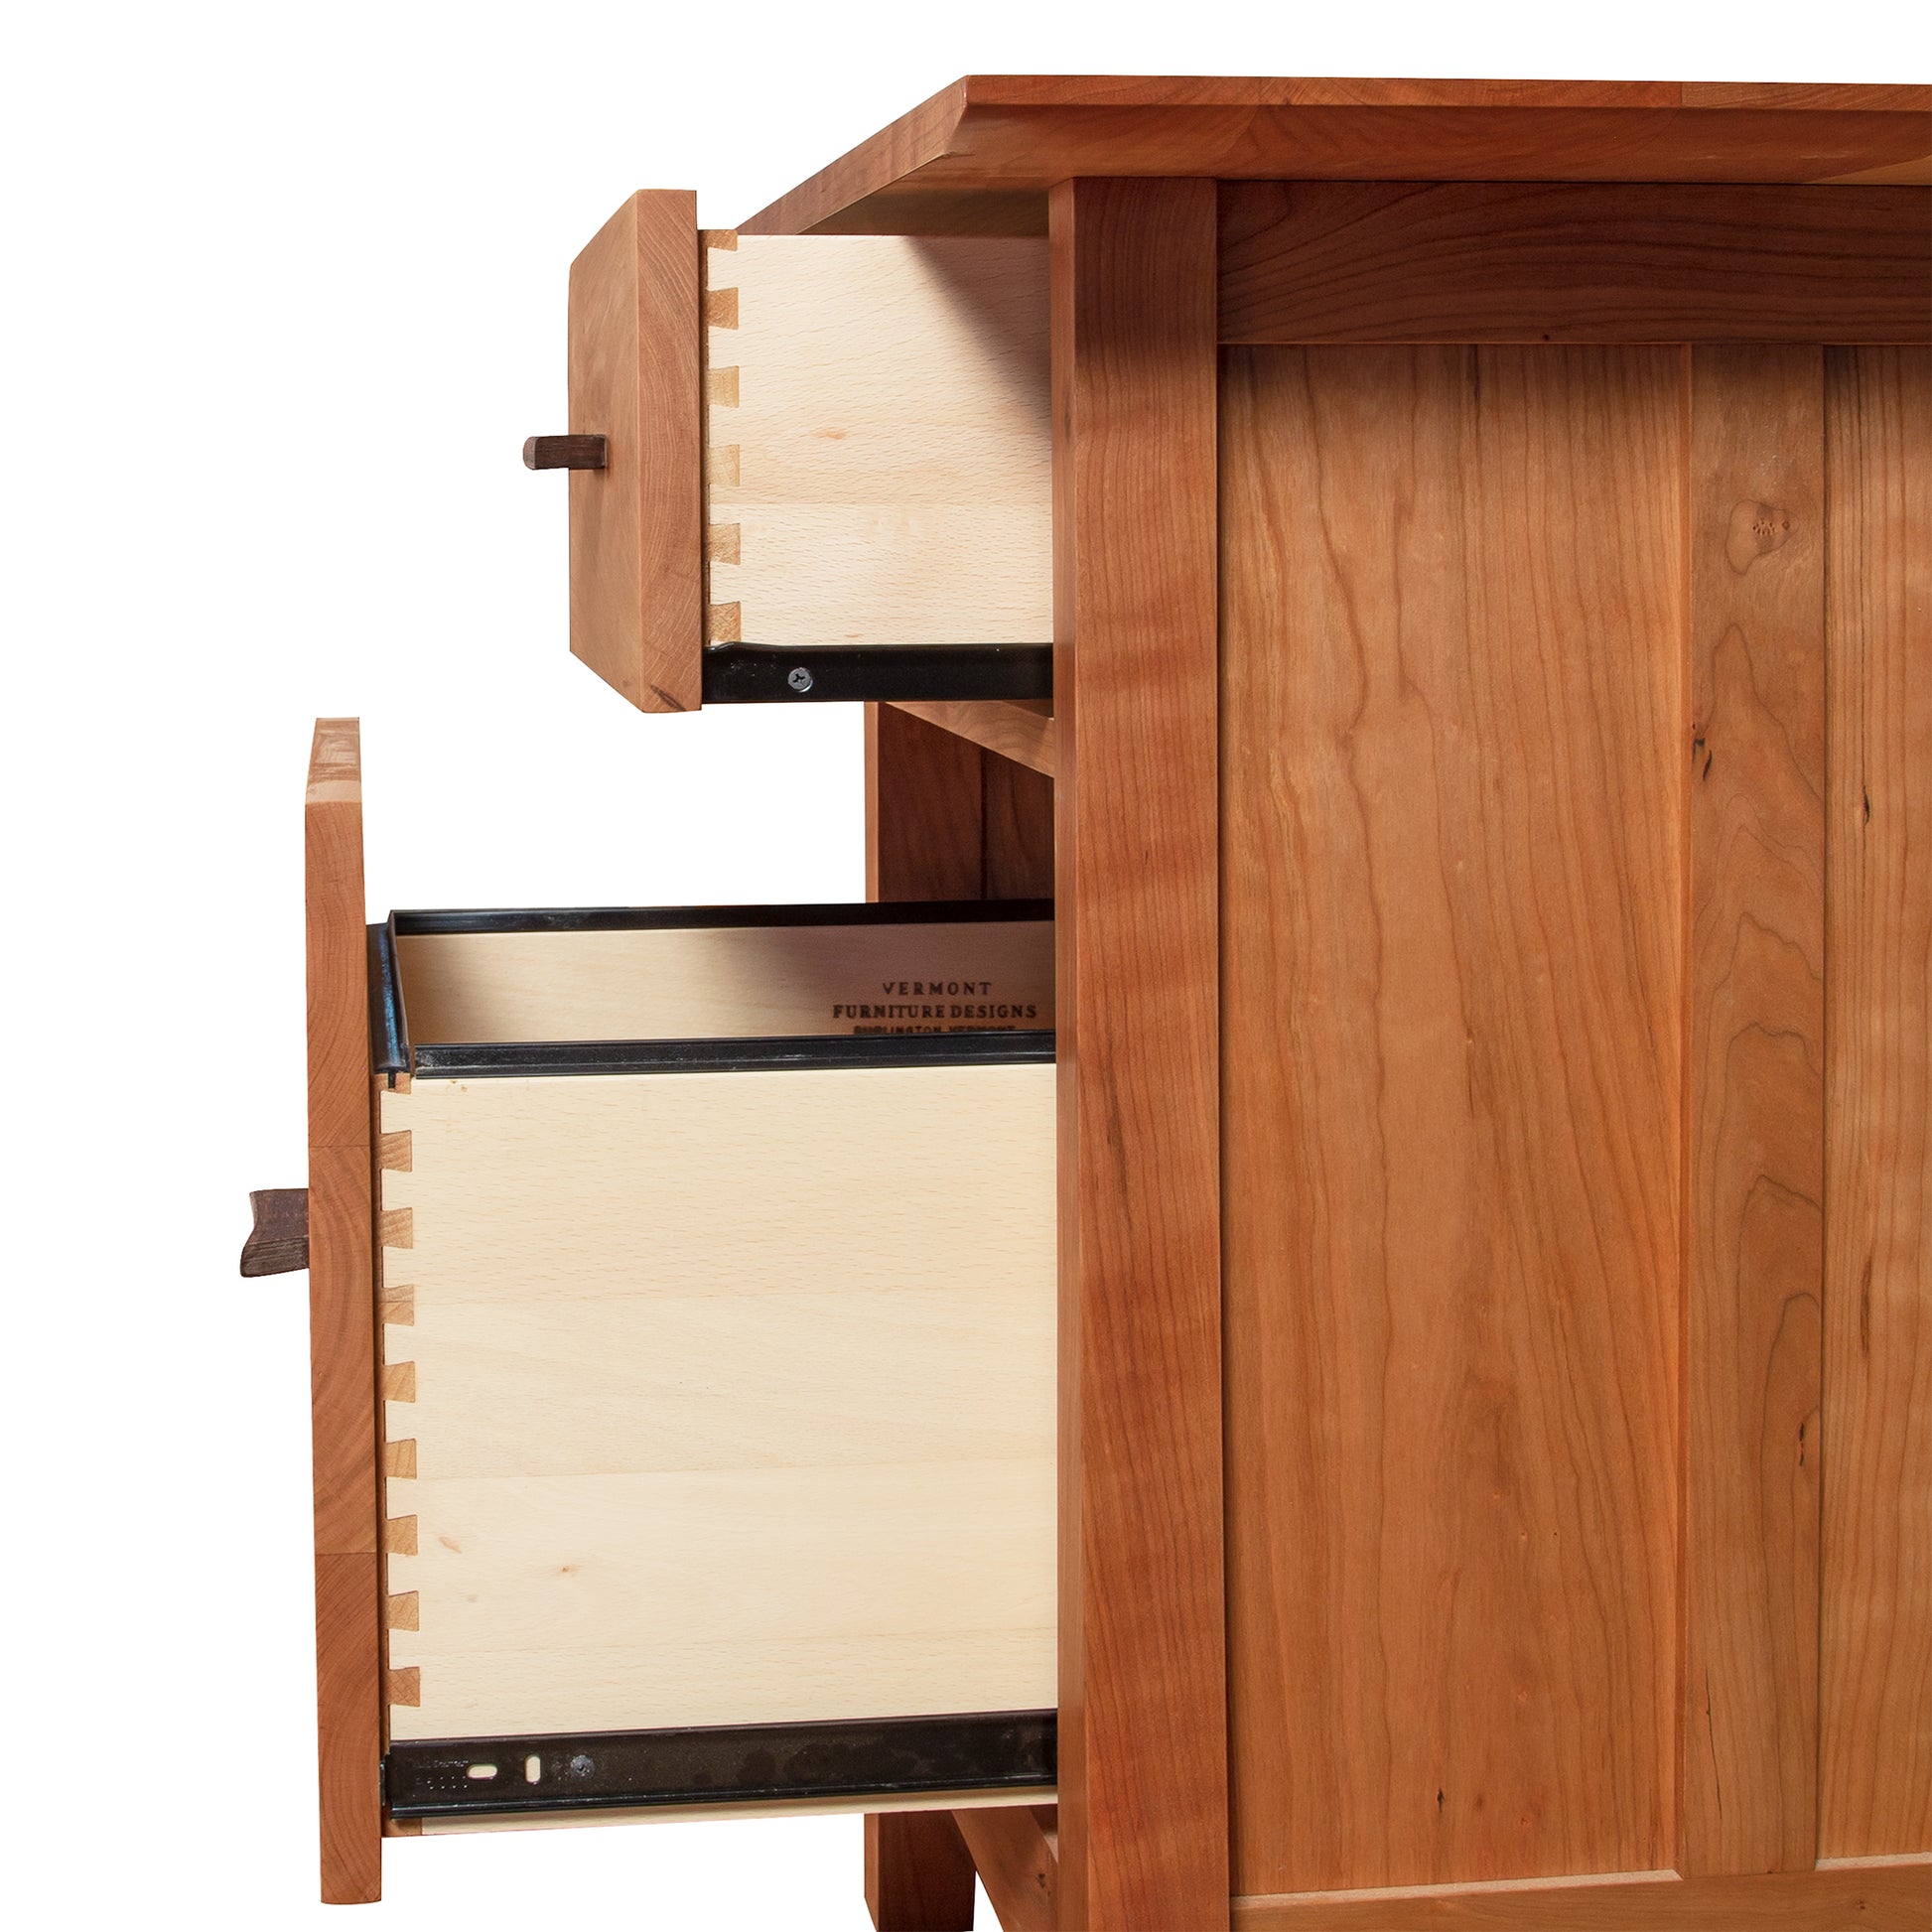 A Contemporary Craftsman Study Desk from Vermont Furniture Designs, featuring two drawers, is made of solid wood.